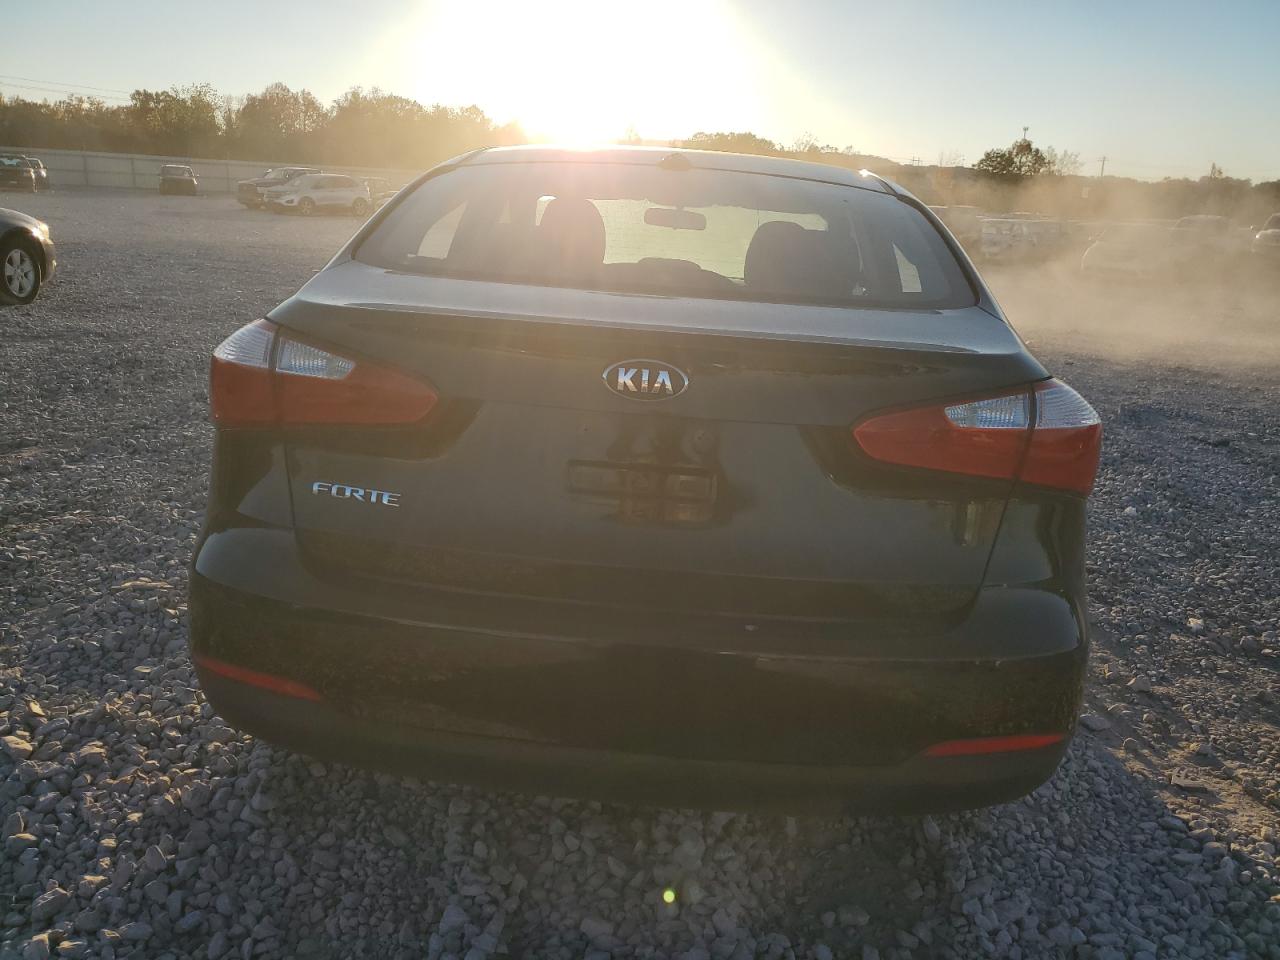 KNAFK4A64G5****** Salvage and Repairable 2016 Kia Forte in Alabama State